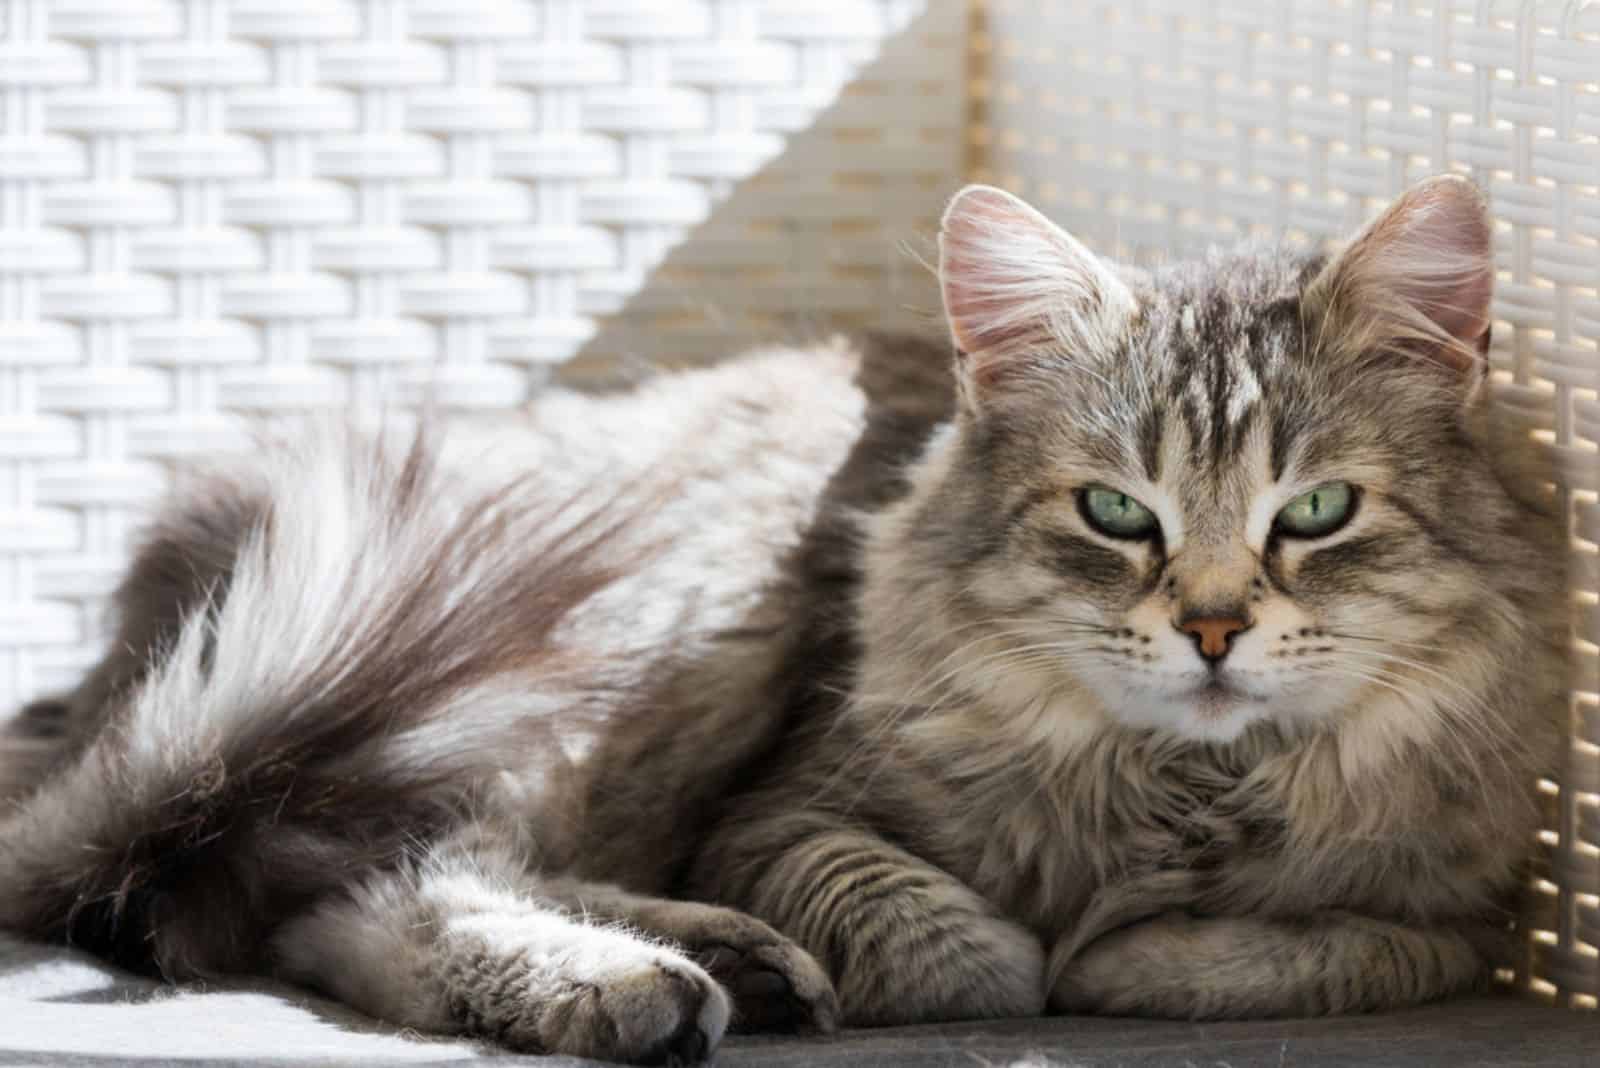 Adorable long haired cat of siberian breed in relax